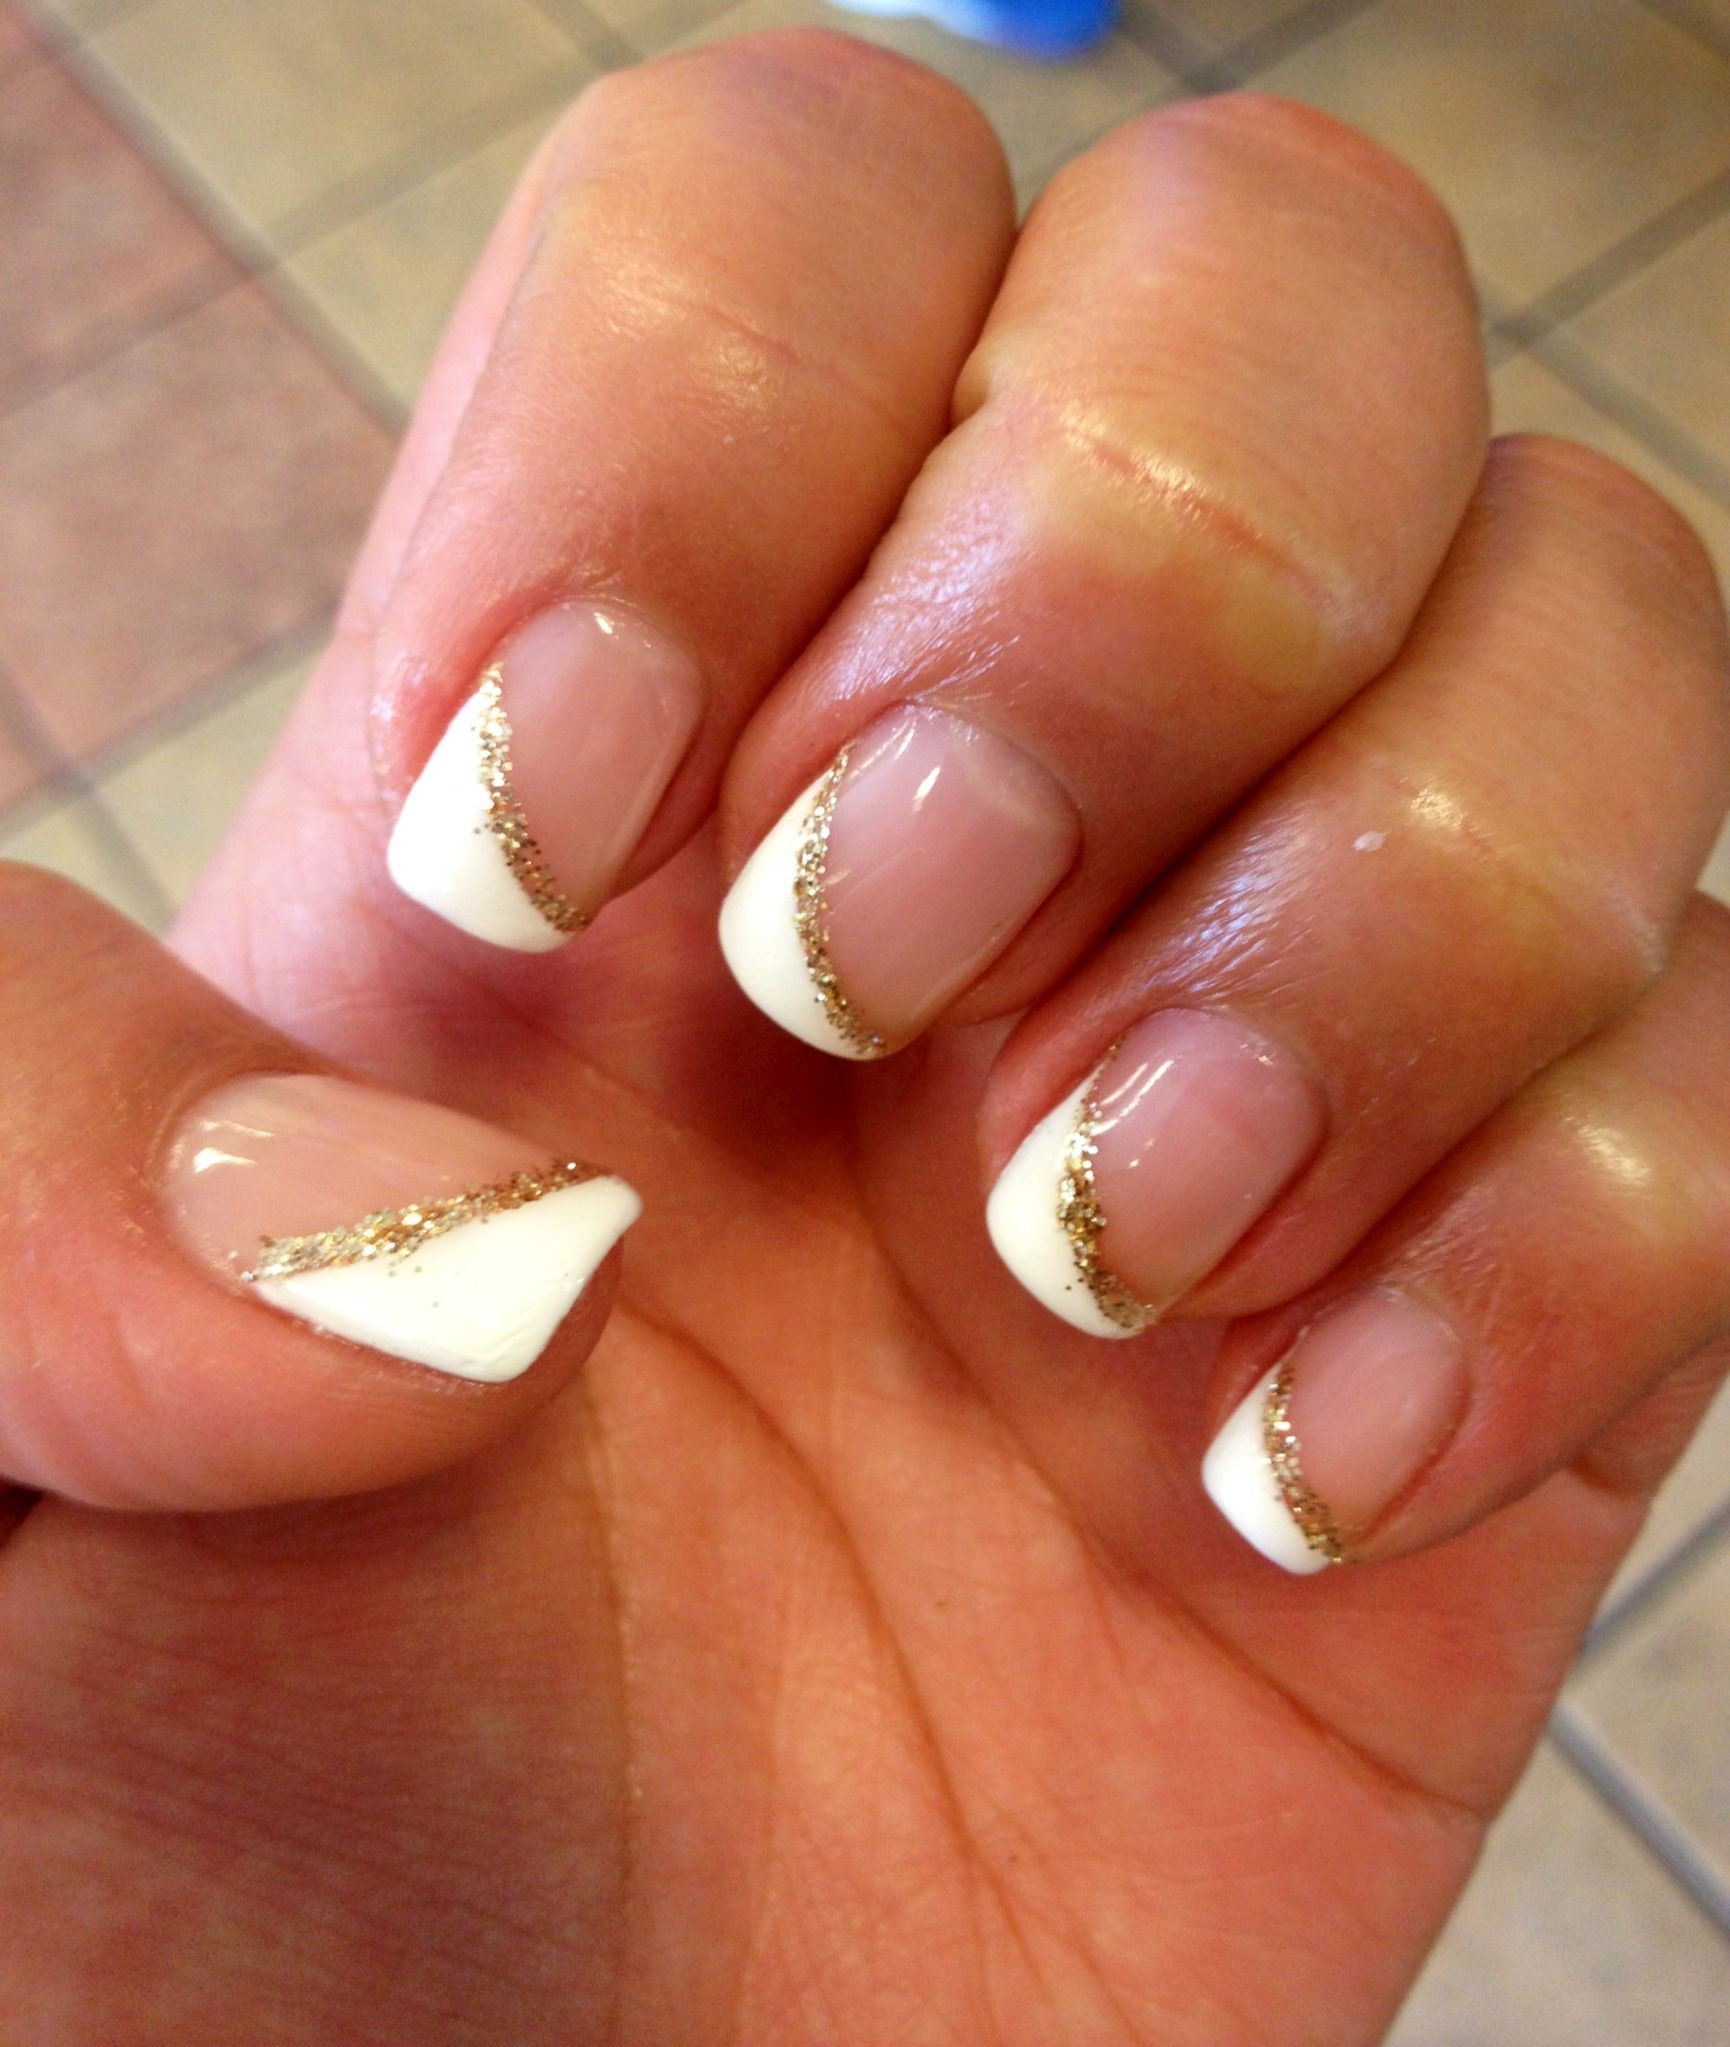 Wedding Nails French Manicure
 My beautiful angled french tip Wedding Nails